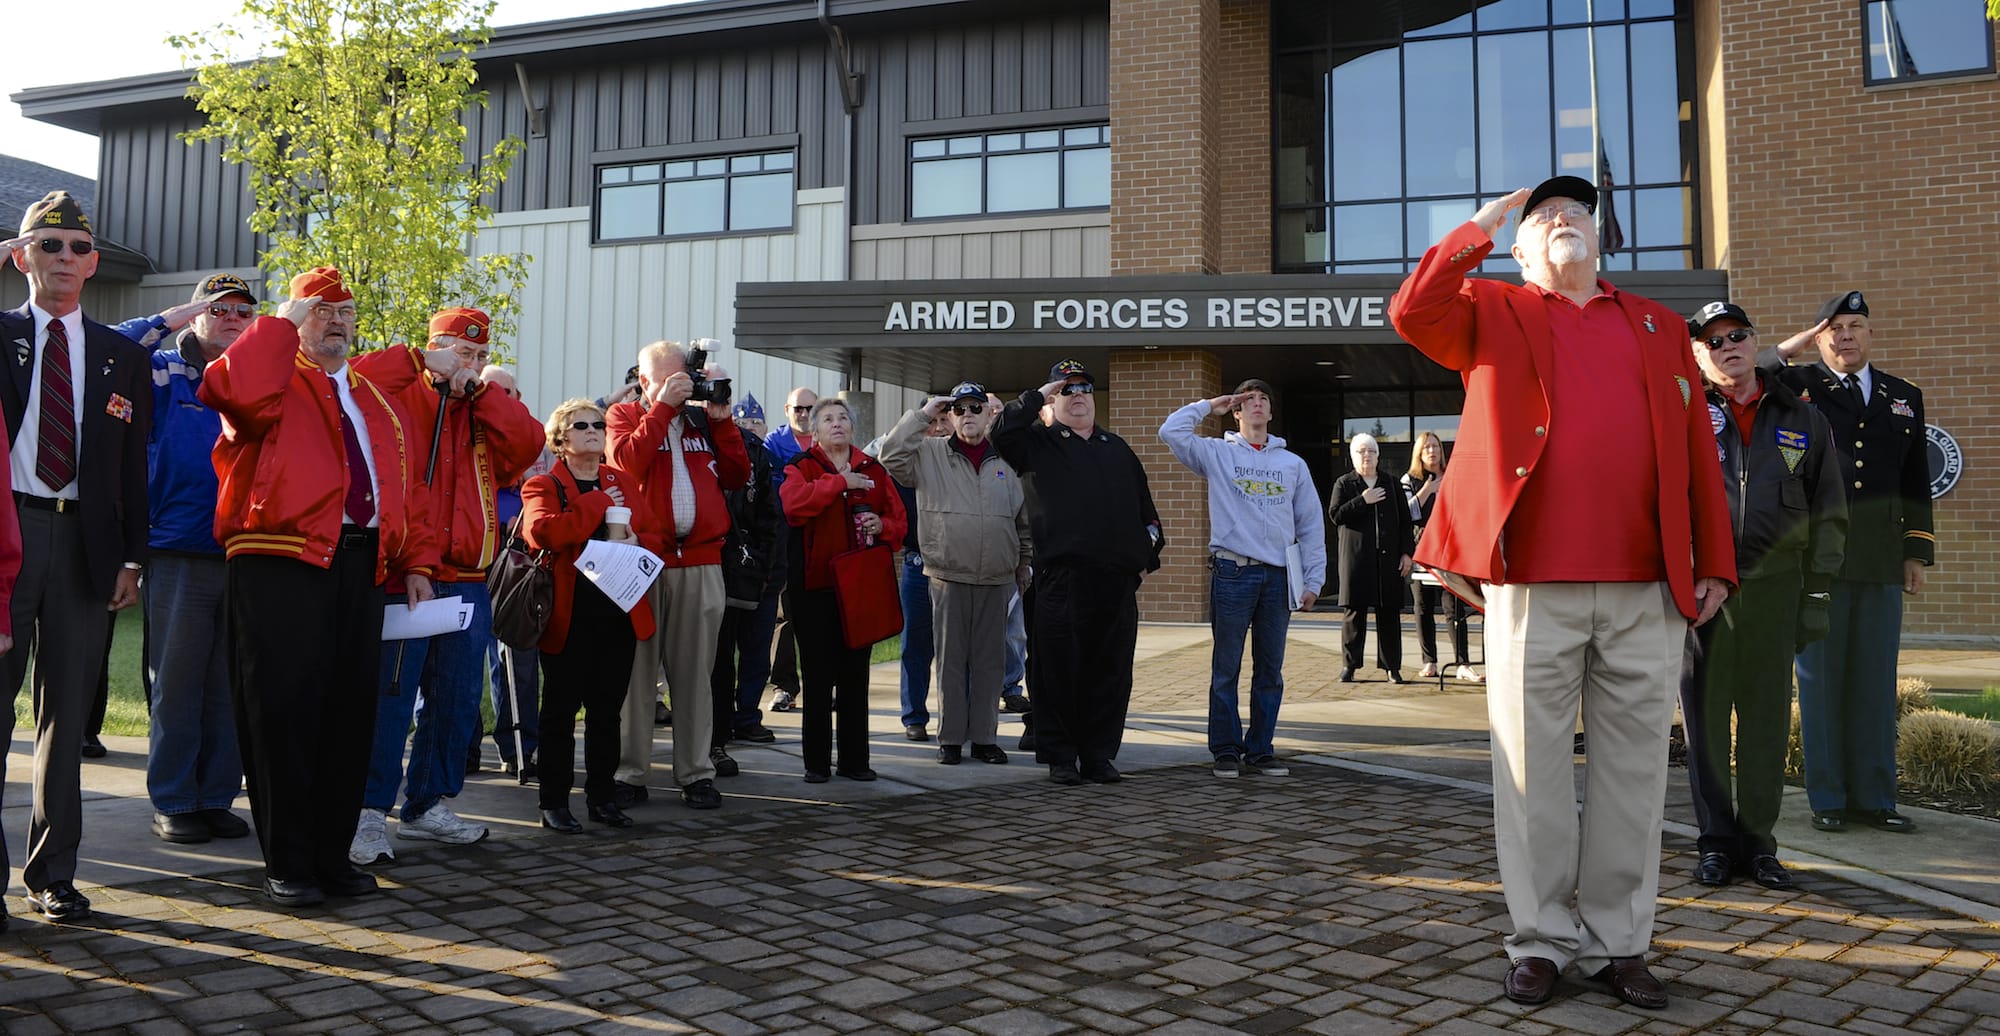 Jerry Keen, at right, leads a salute to the flag as members and supporters of the nonprofit Community Military Appreciation committee gather to dedicate a stone at a POW/MIA memorial at the Armed Forces Reserve Center.